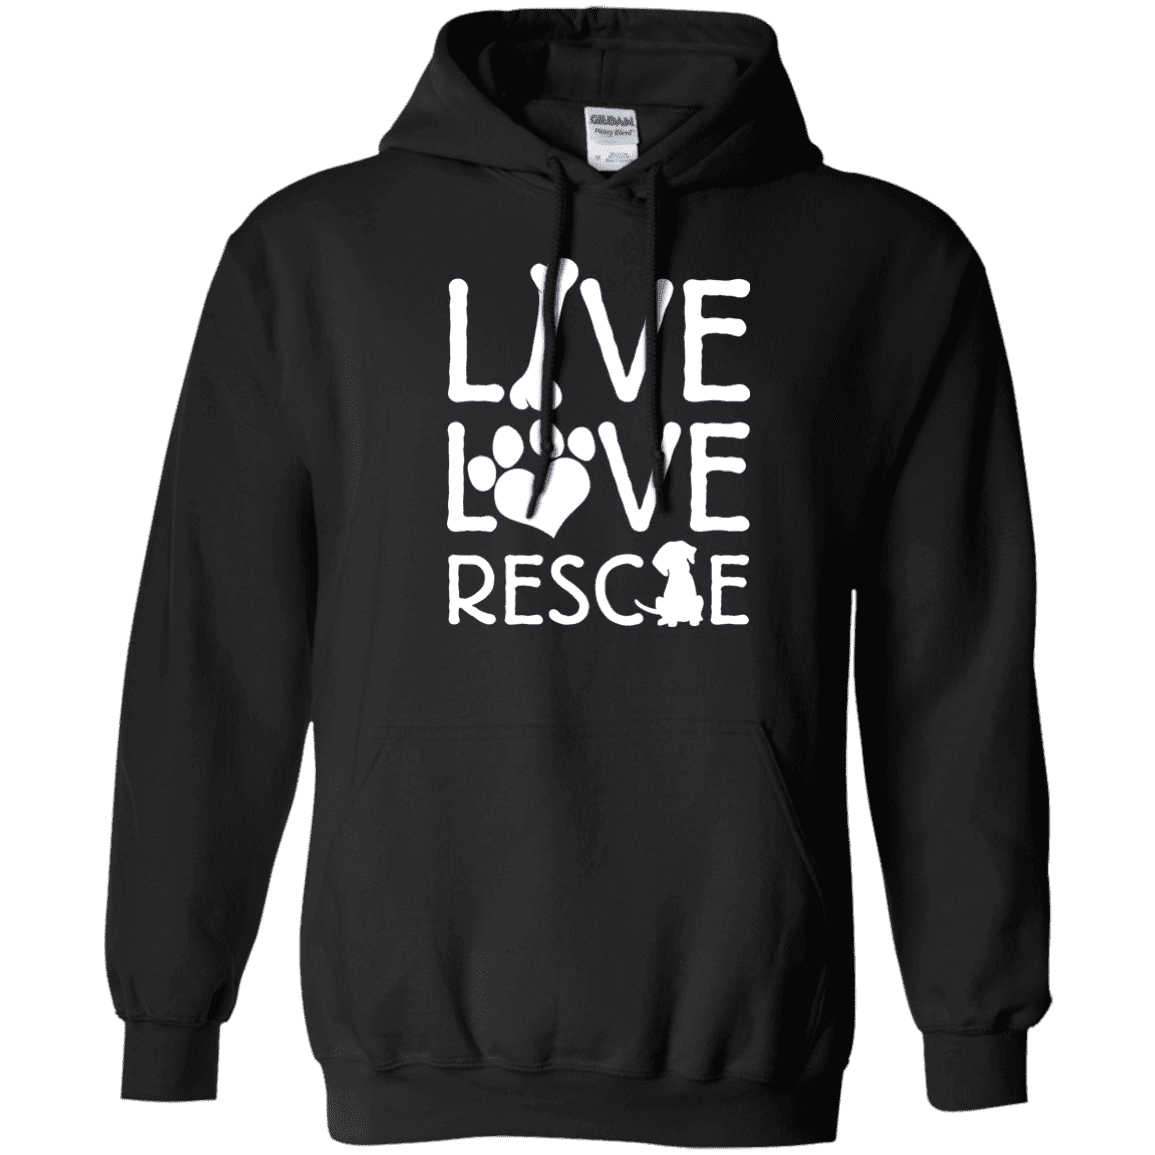 Live Love Rescue - Hoodie.